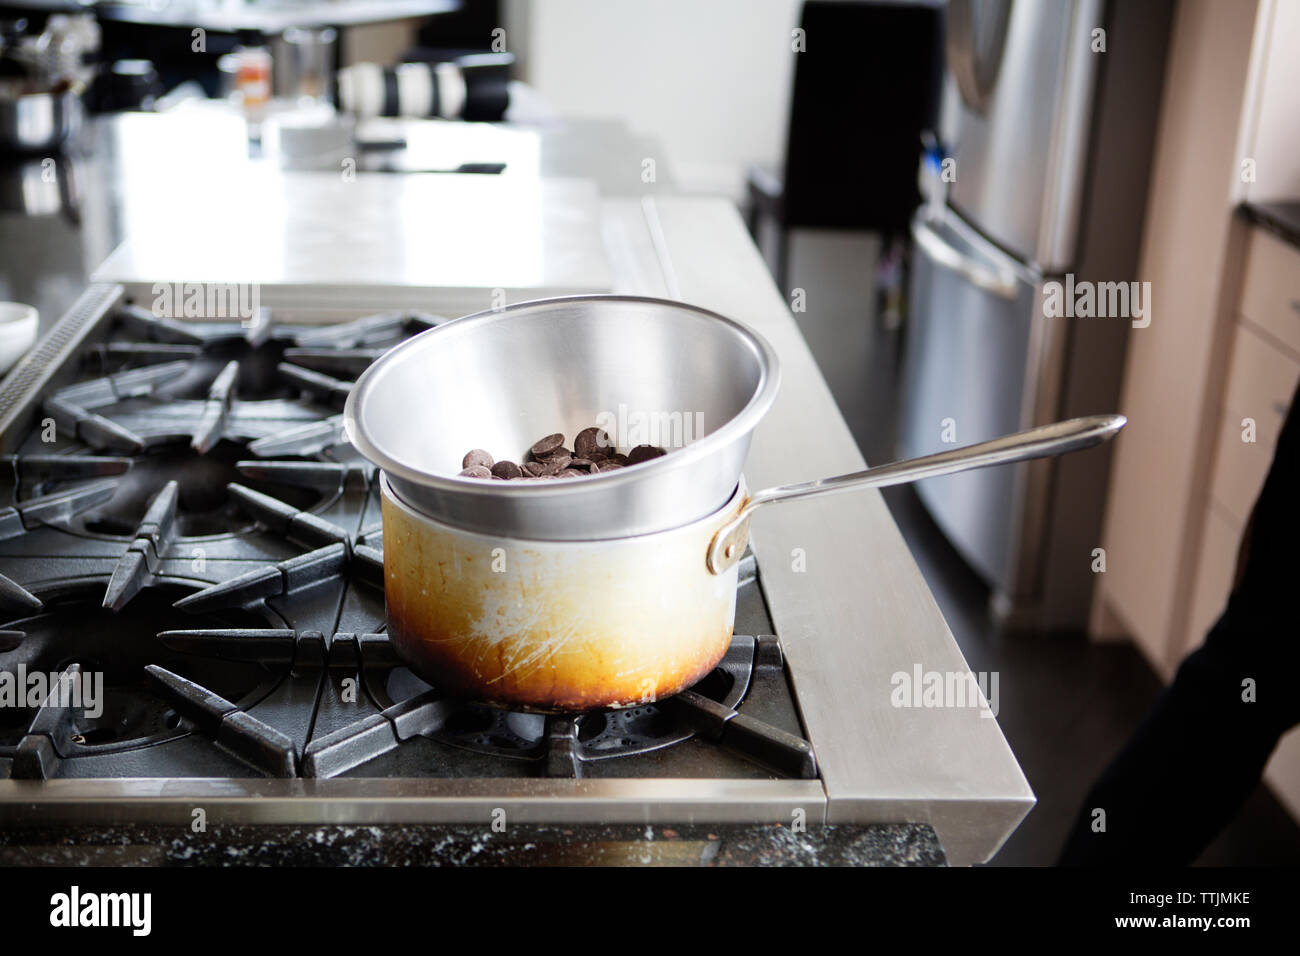 Chocolate chips in double boiler on stove Stock Photo